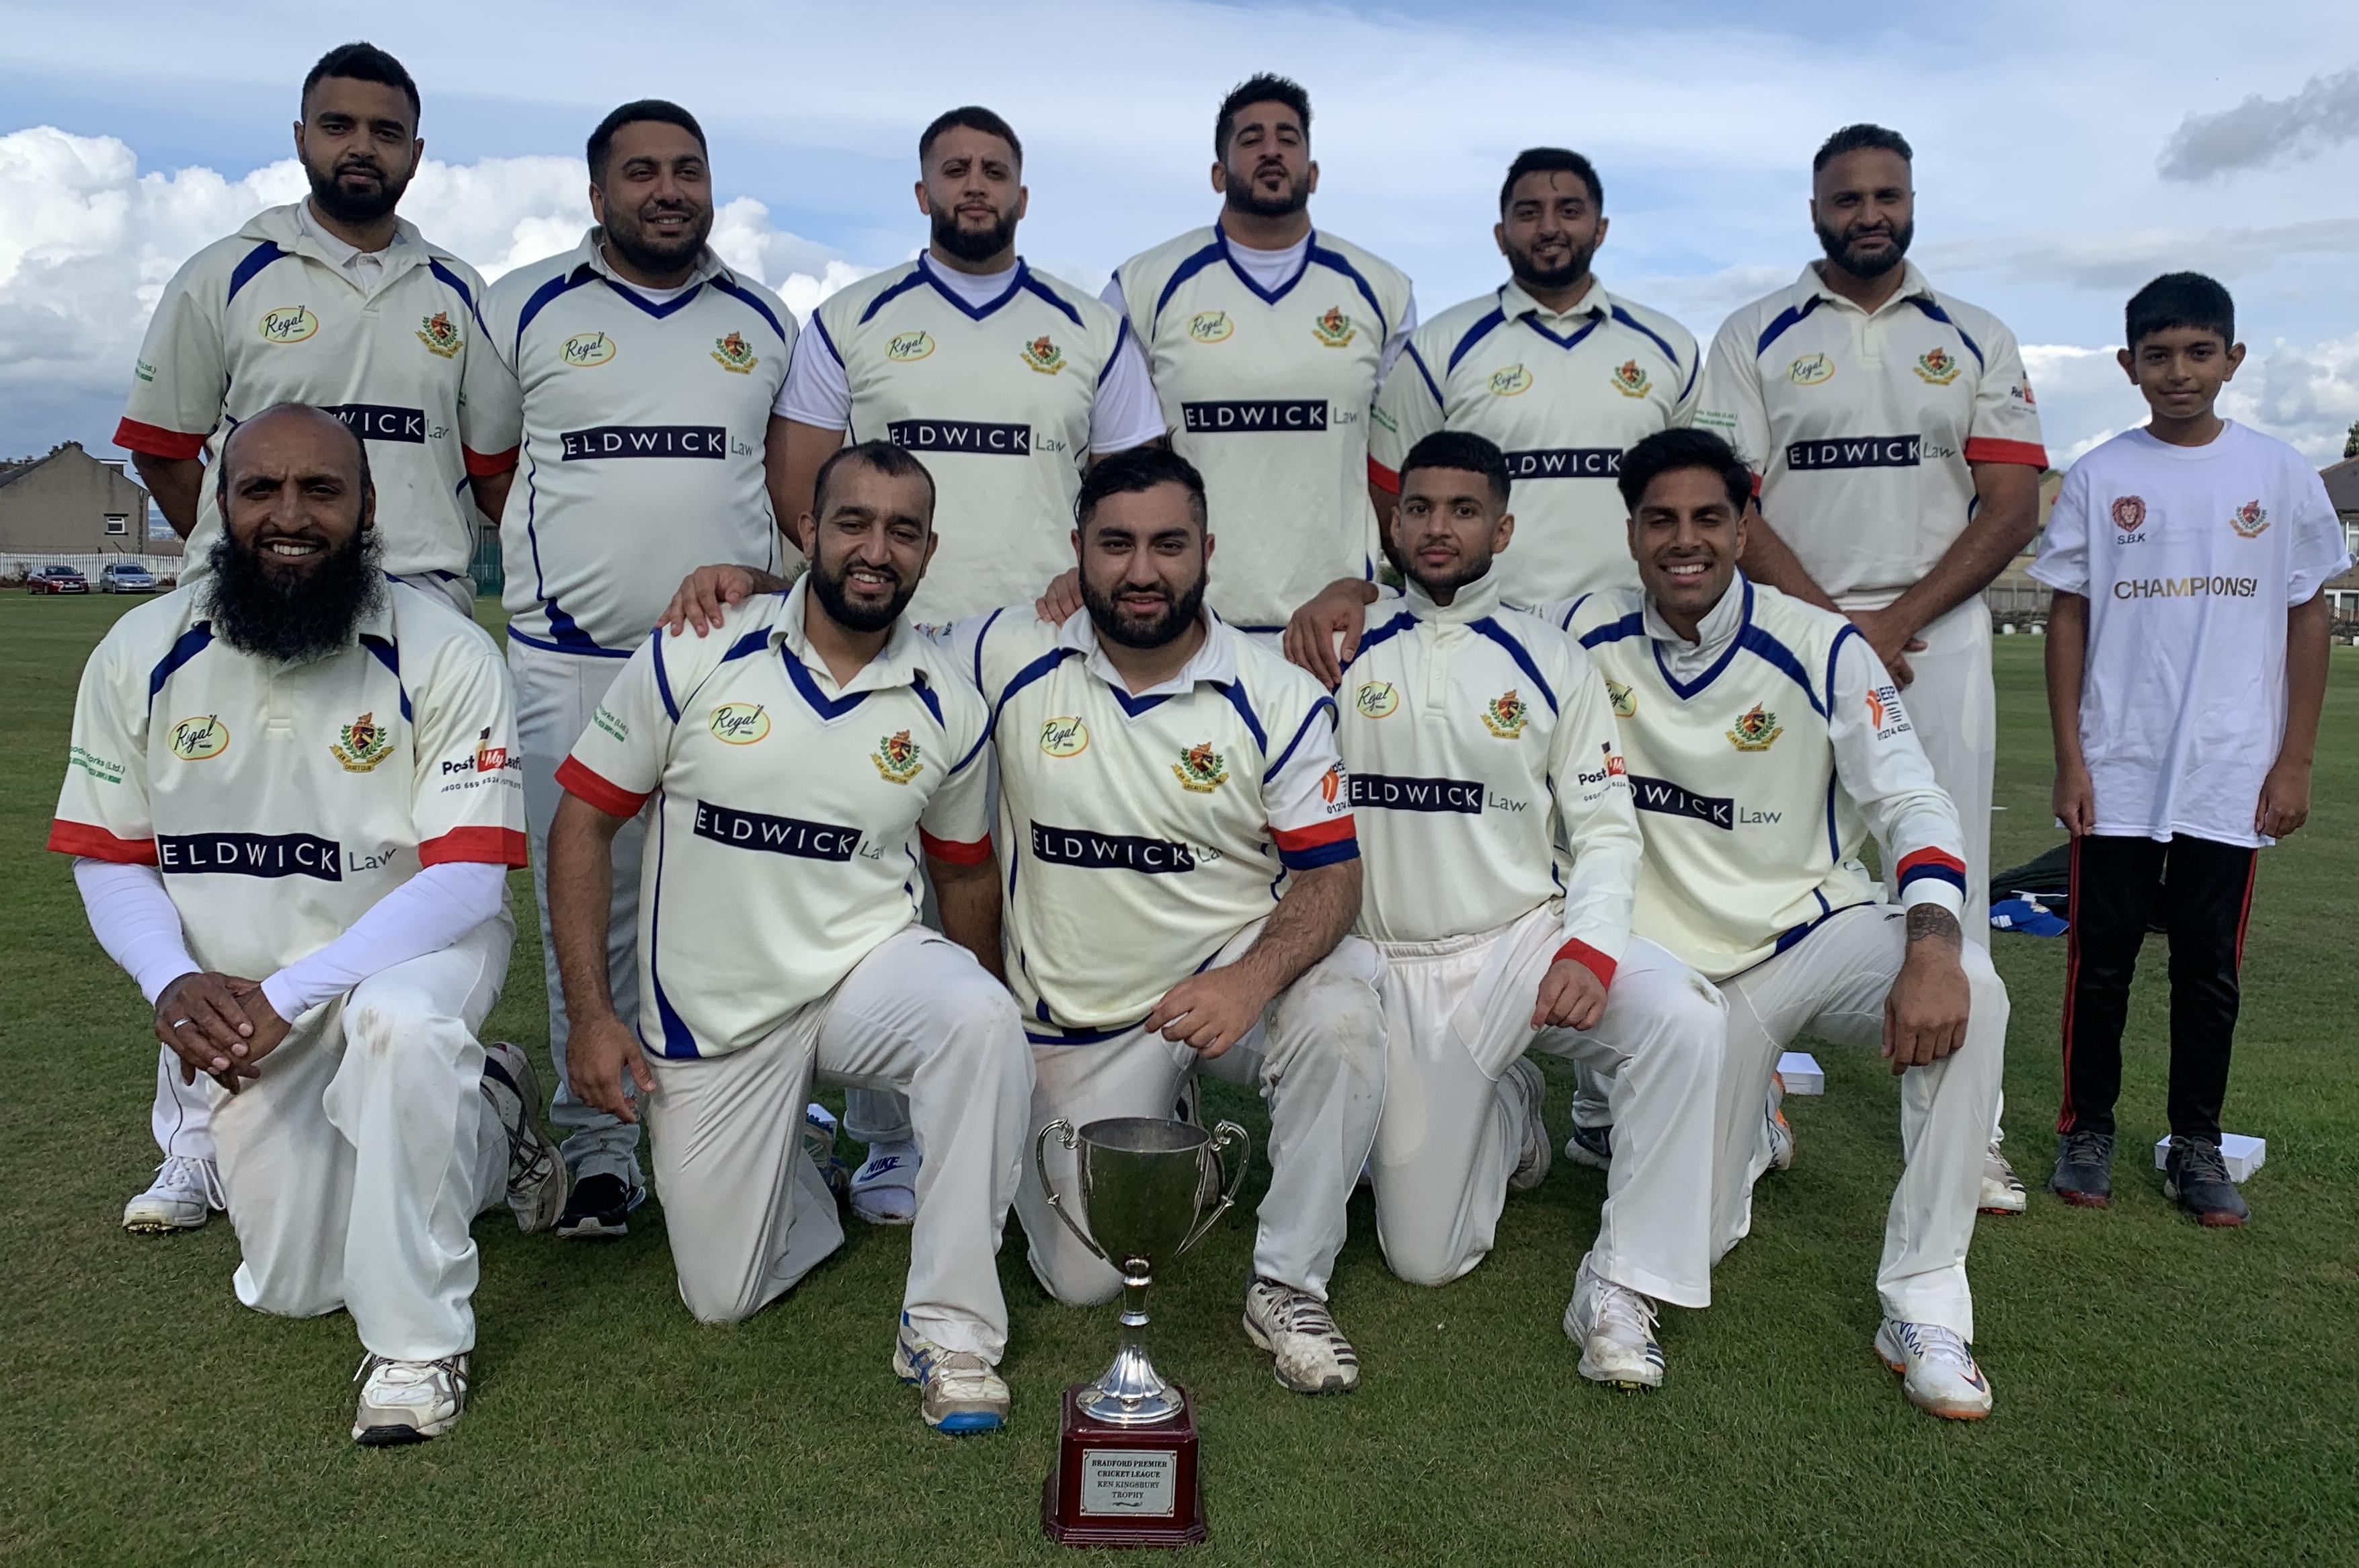 Second Teams Division One champions